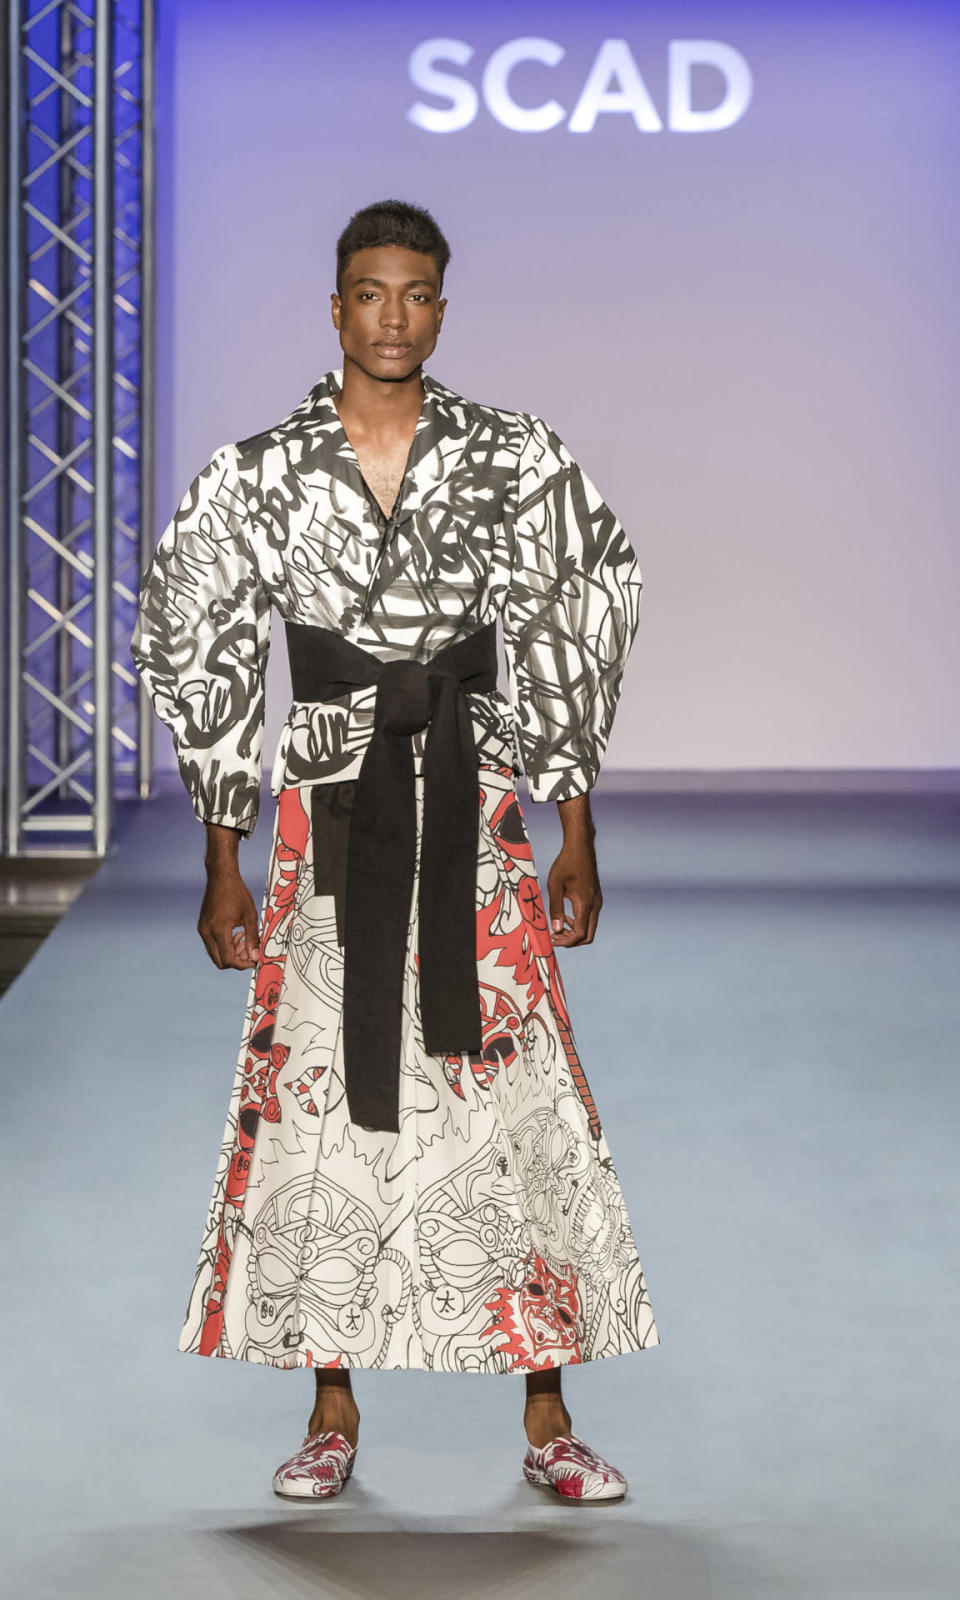 SCAD graduate Taehoo Hwang’s designs featured exaggerated shapes and an intricate clash of painterly prints.